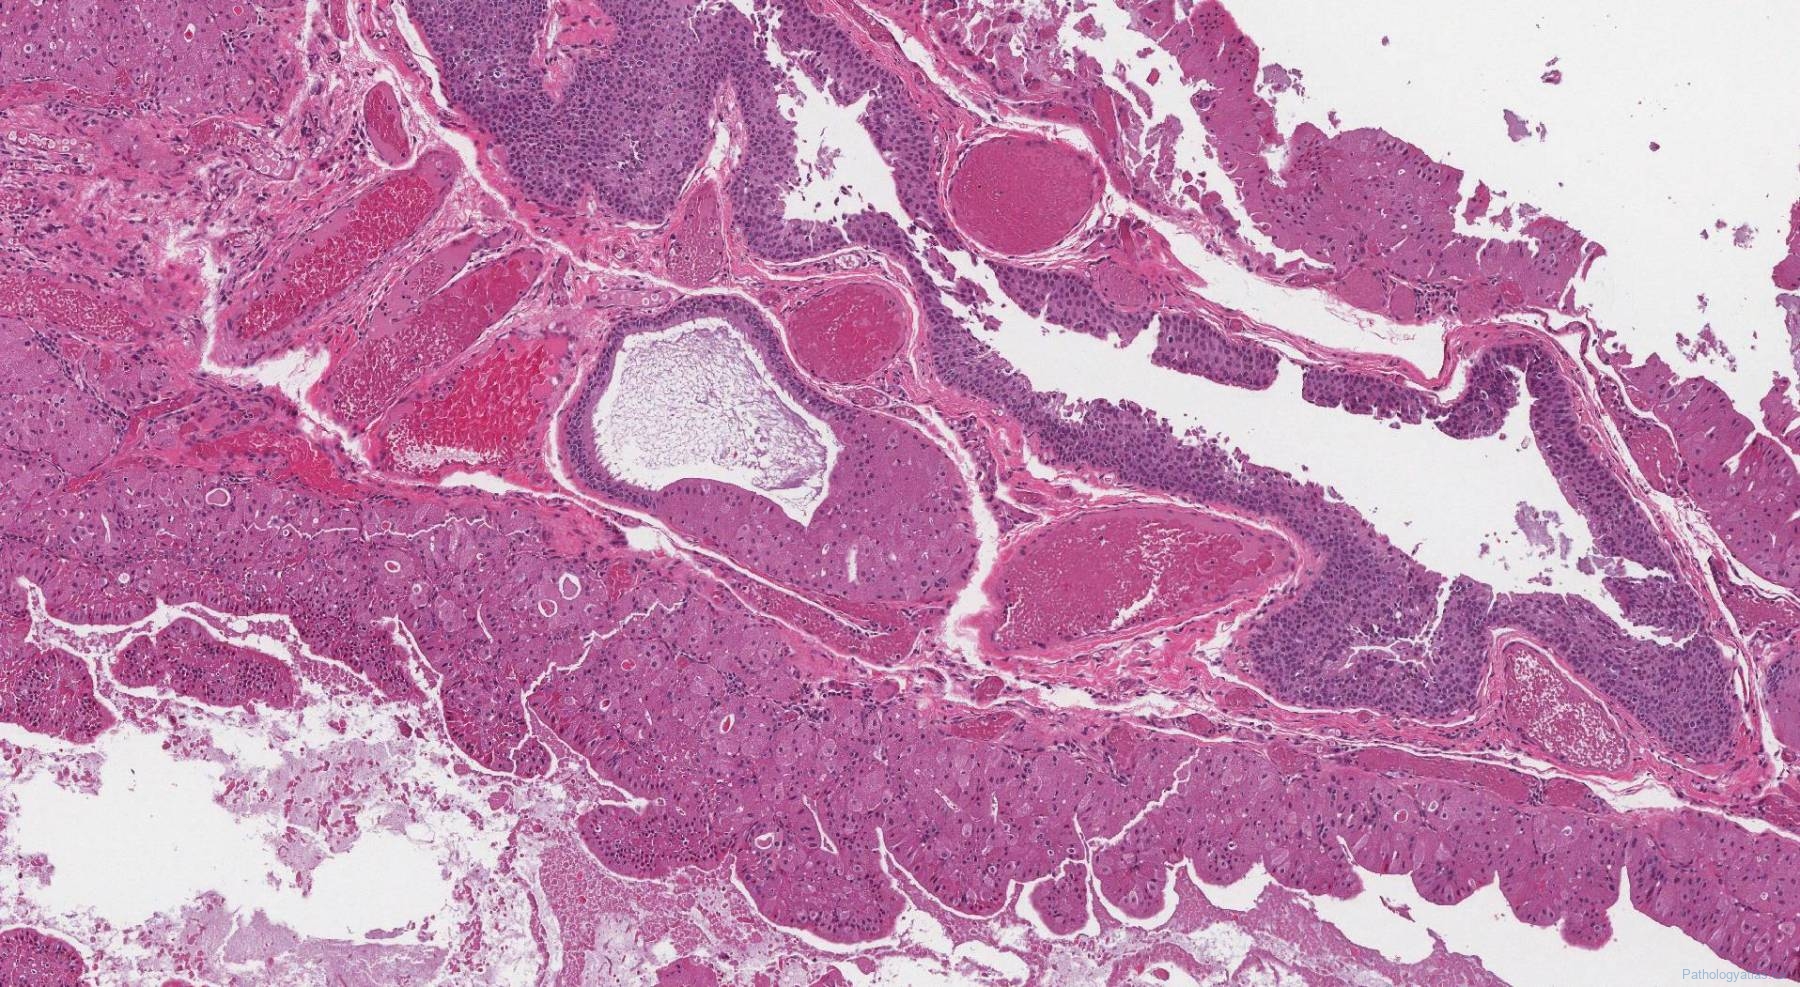 Saccular Cyst Archives Atlas Of Pathology